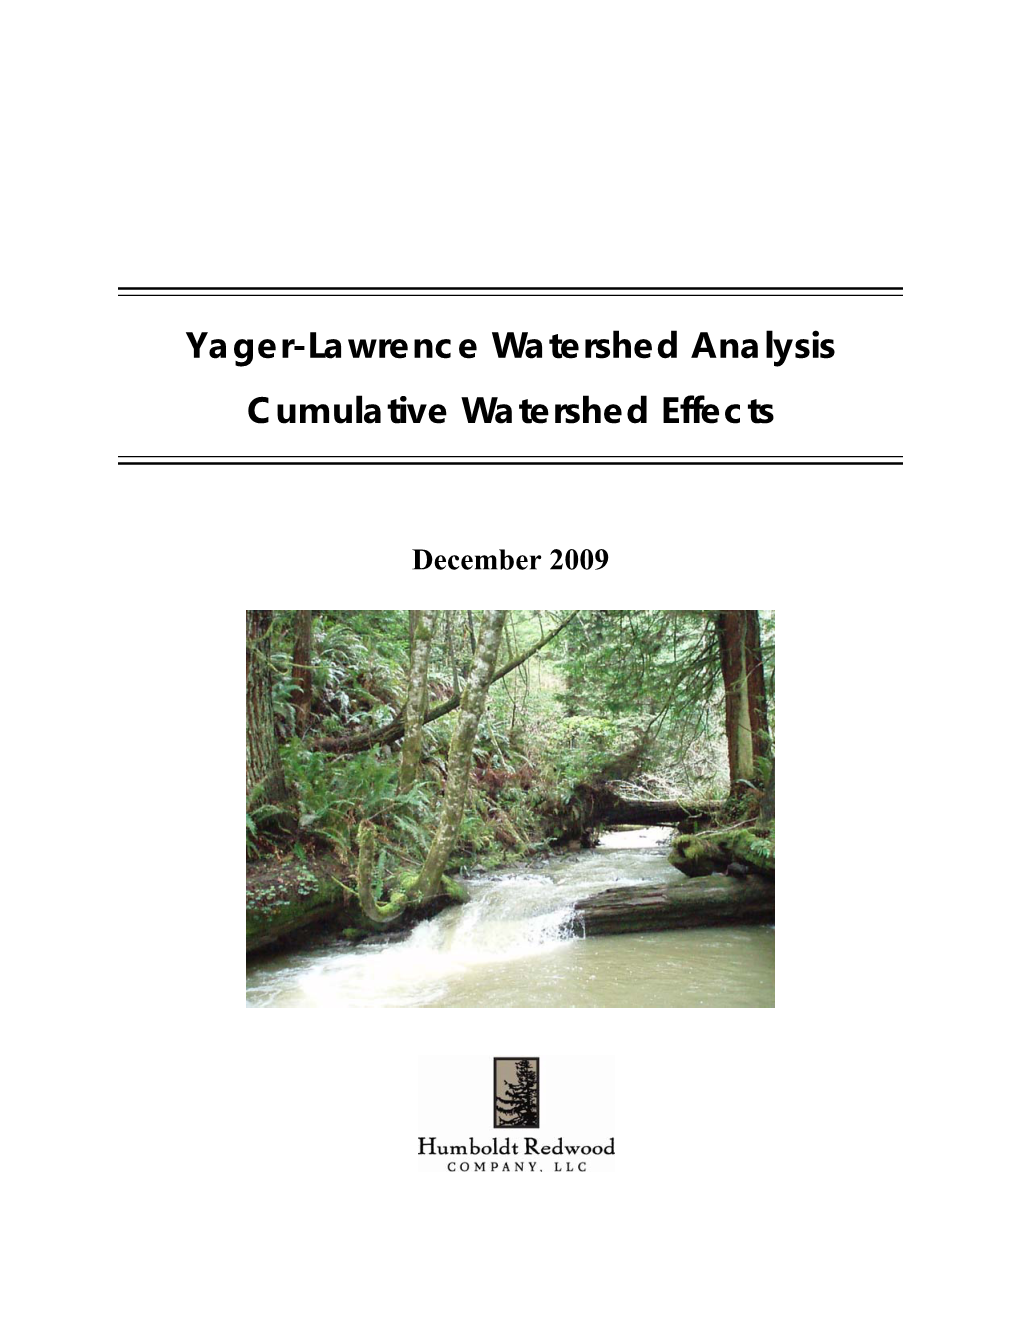 Yager-Lawrence Watershed Analysis